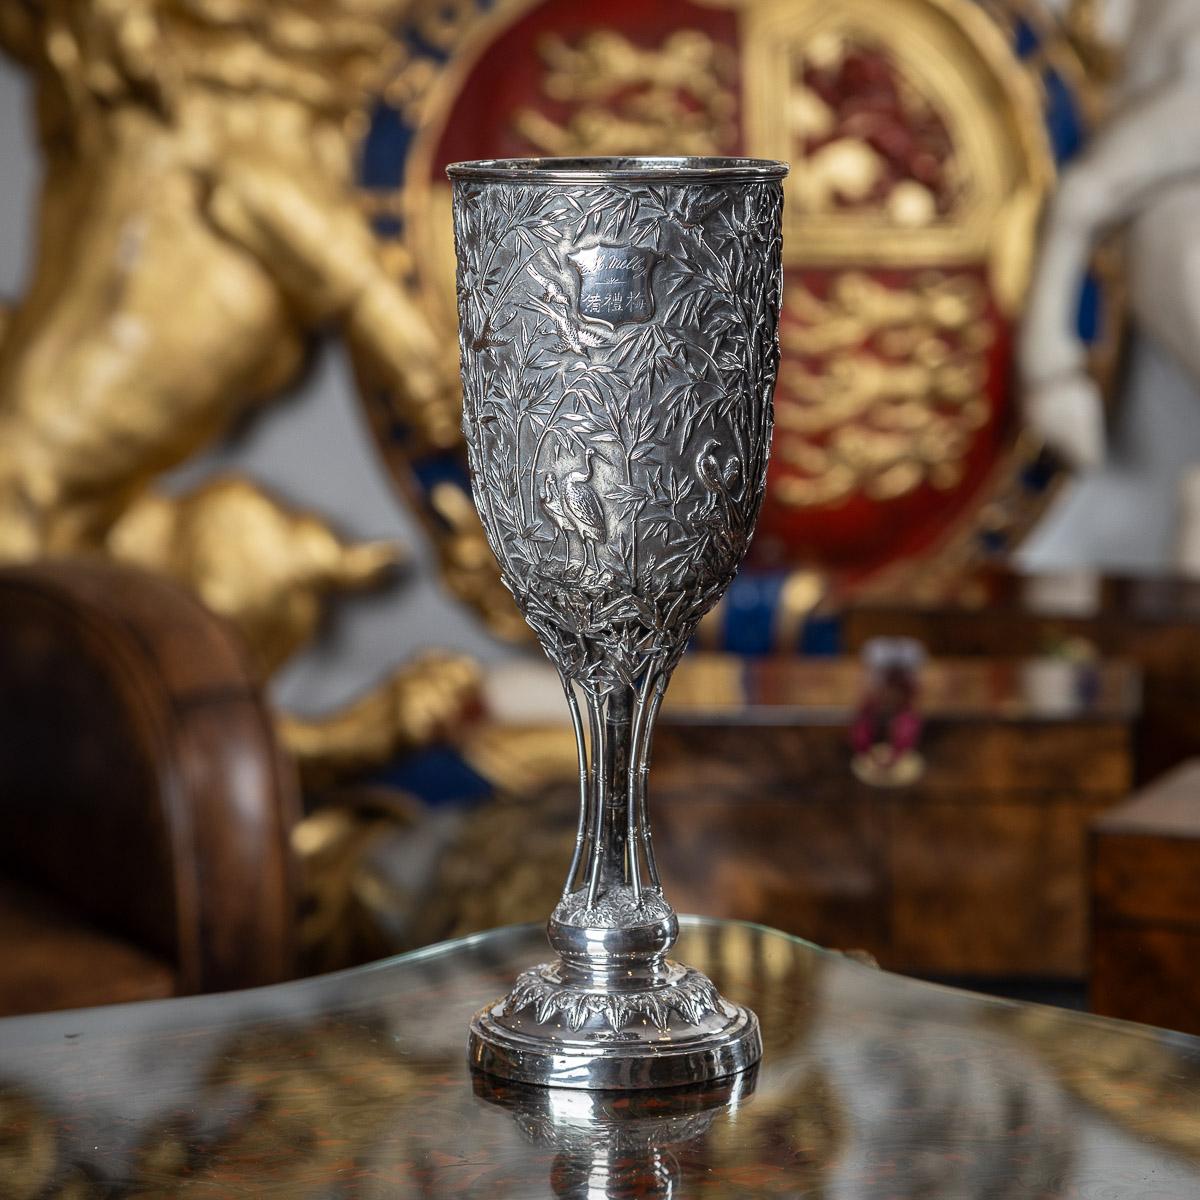 Antique 19th Century Chinese export solid silver goblet, a testament to its impressive size and exceptional craftsmanship. The goblet, a marvel of fine quality, boasts a single-walled vessel that is fully adorned with intricate chasing and embossing